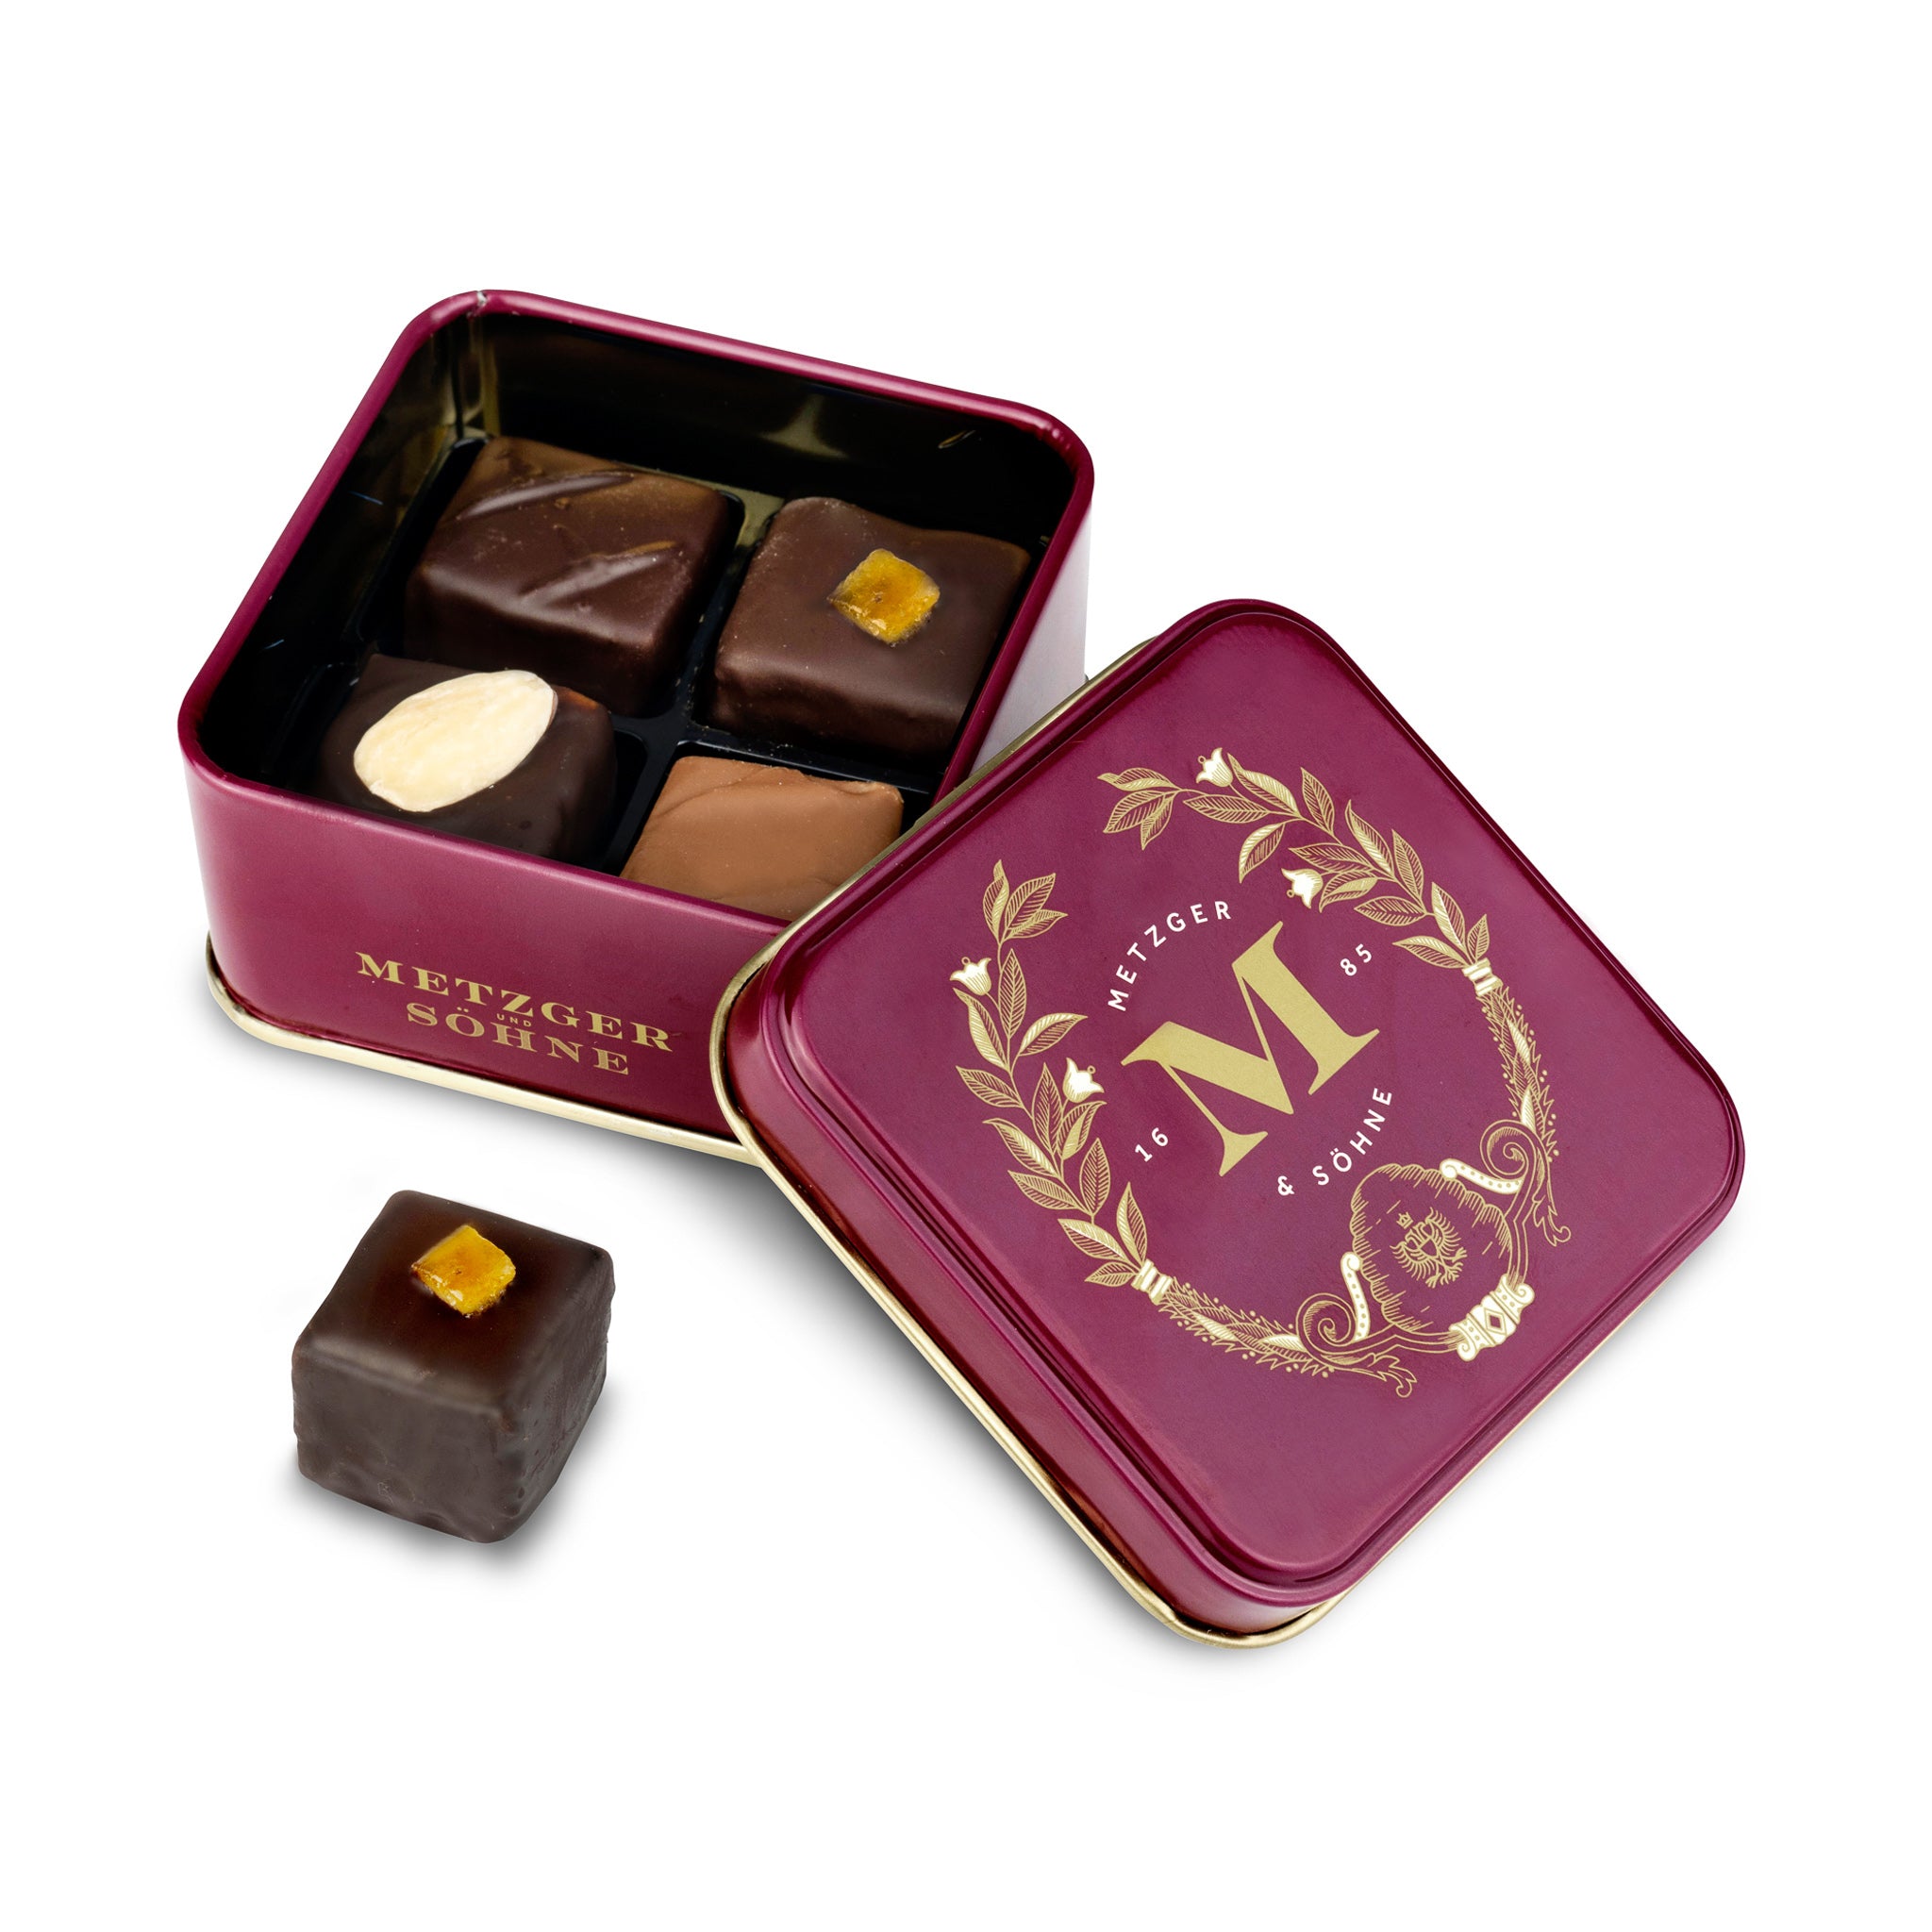 Petit Metzger signature tin in red filled with 4 different Lebkuchen 'honey cake' pralines.